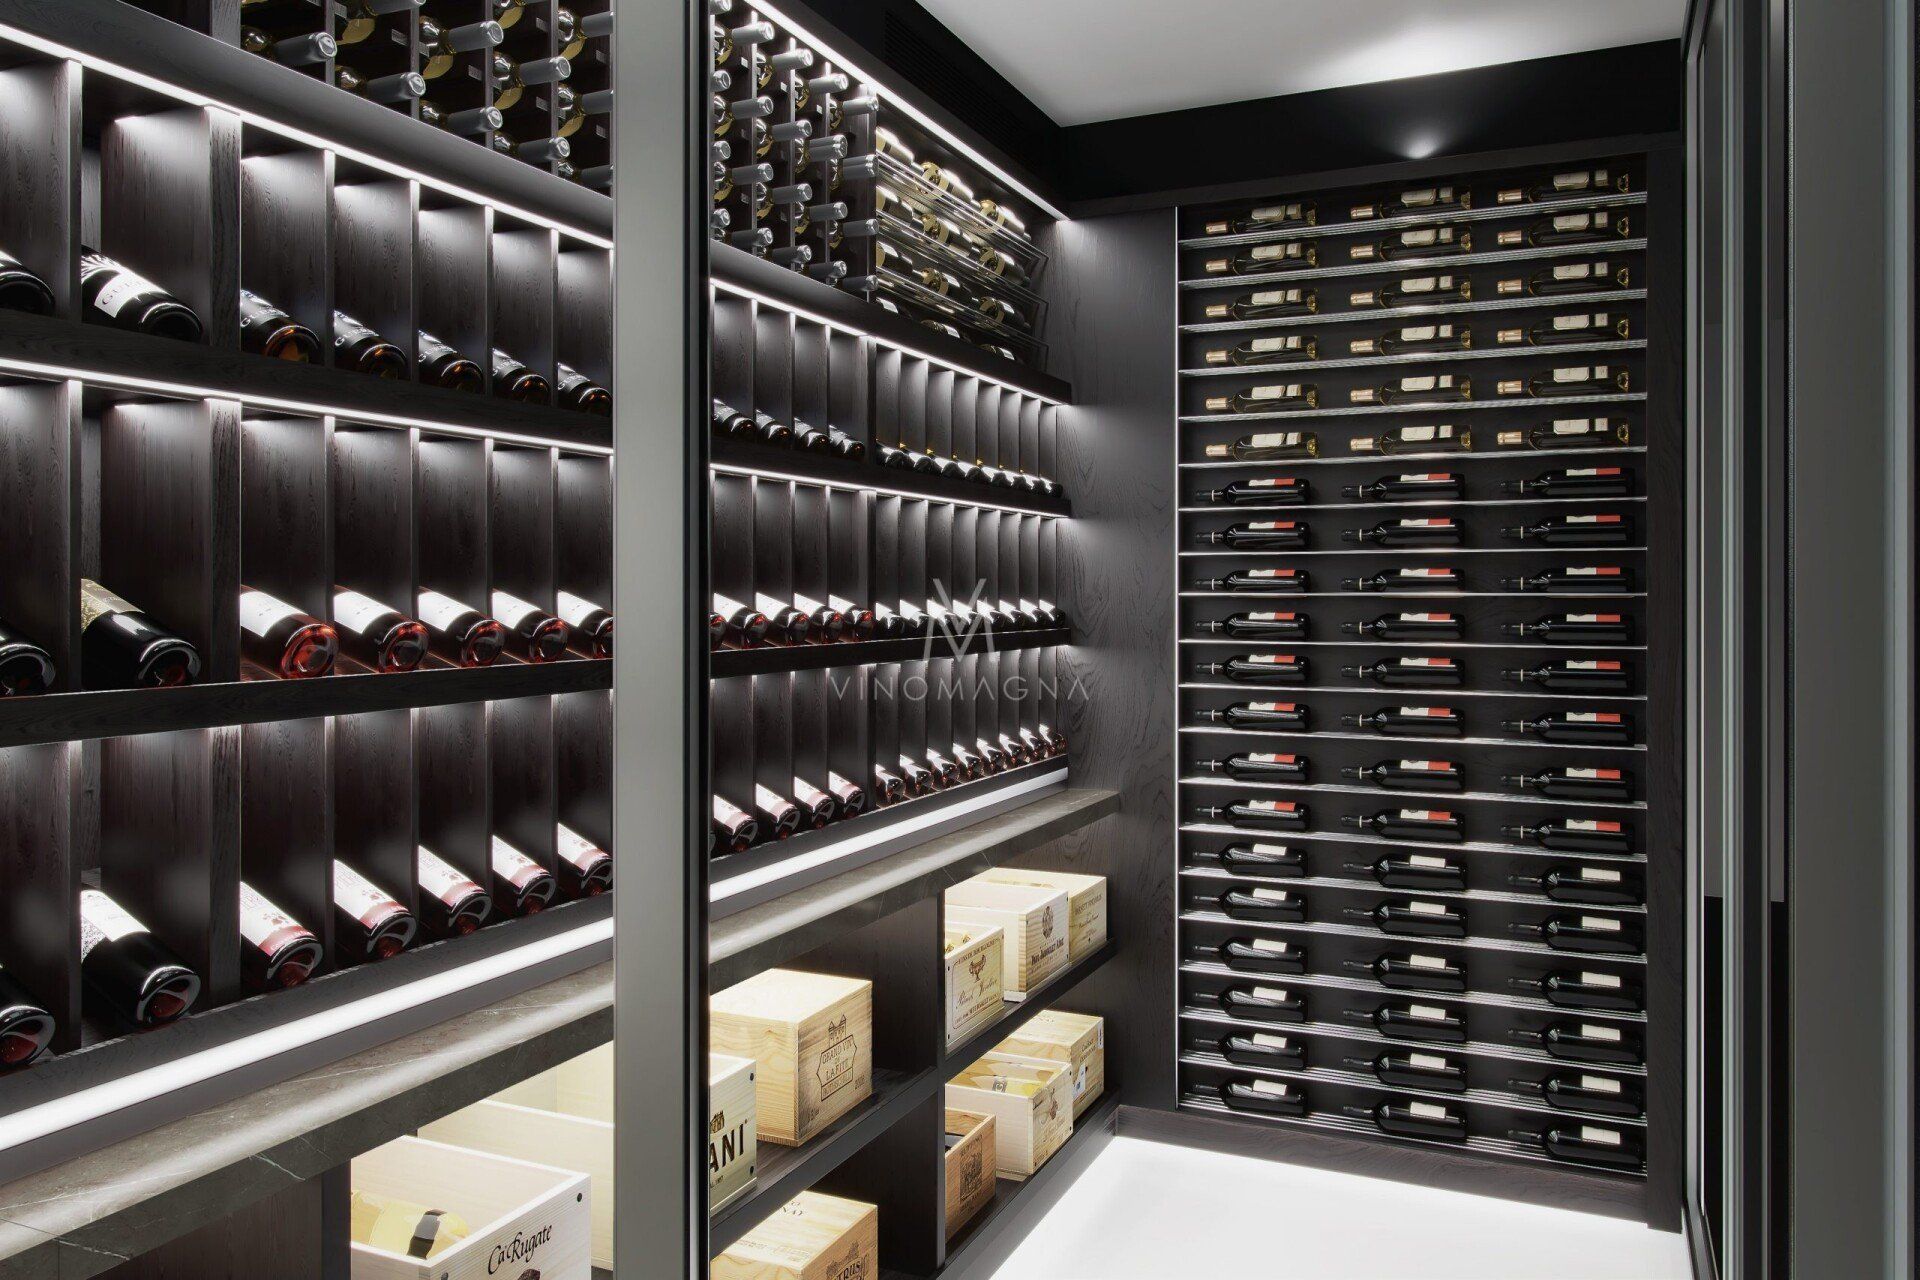 Bespoke Home Wine Cellar With Wood and Marble Vinomagna